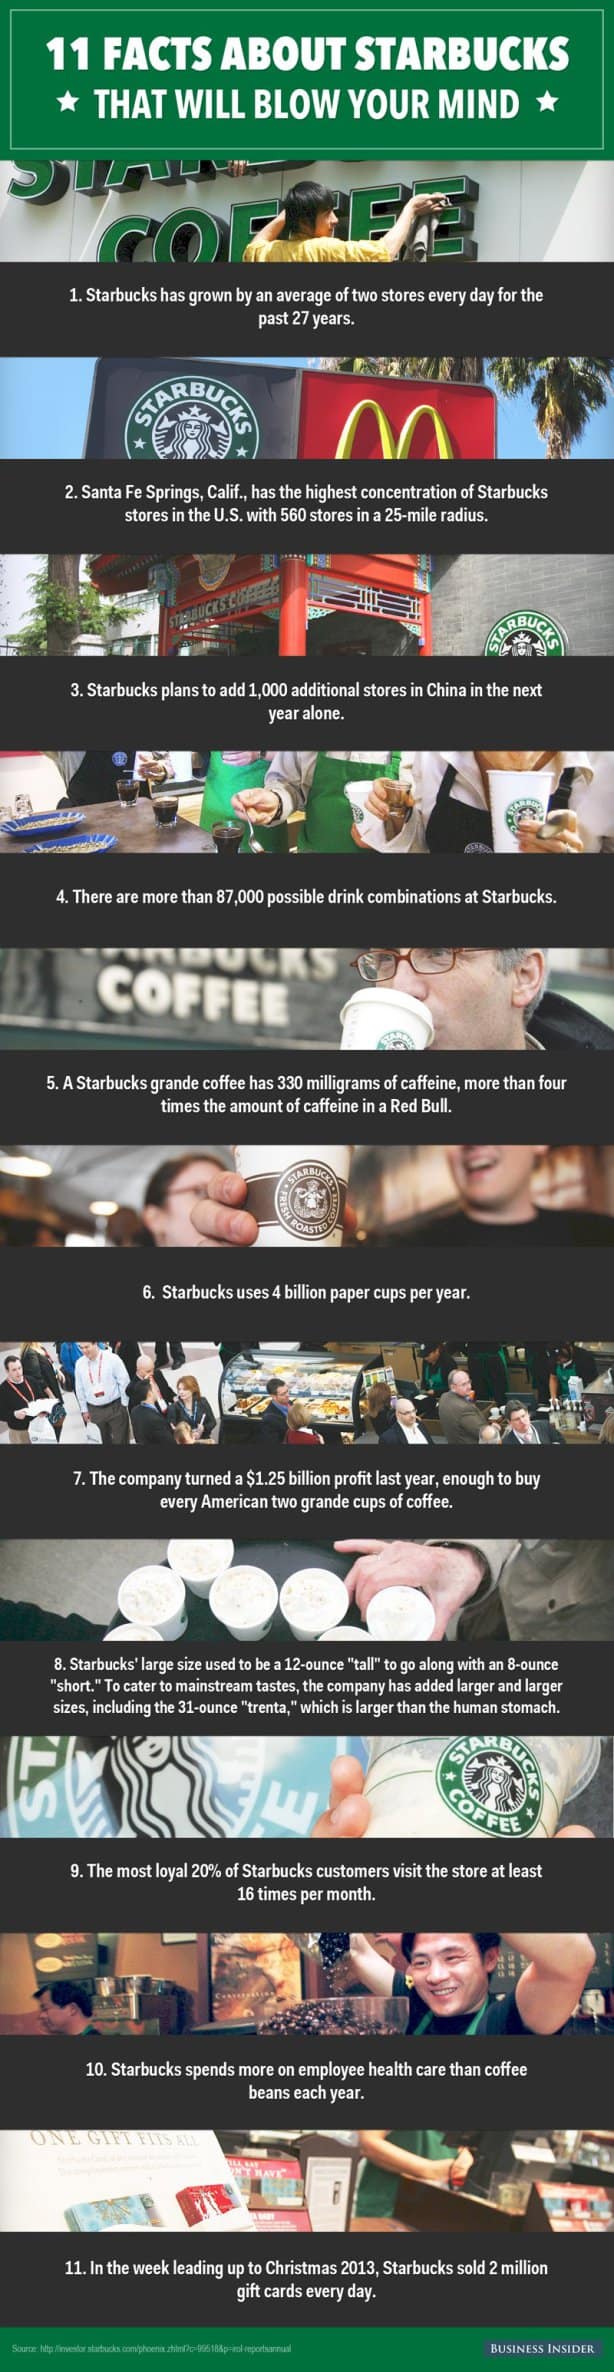 11 Facts About Starbucks Infographic